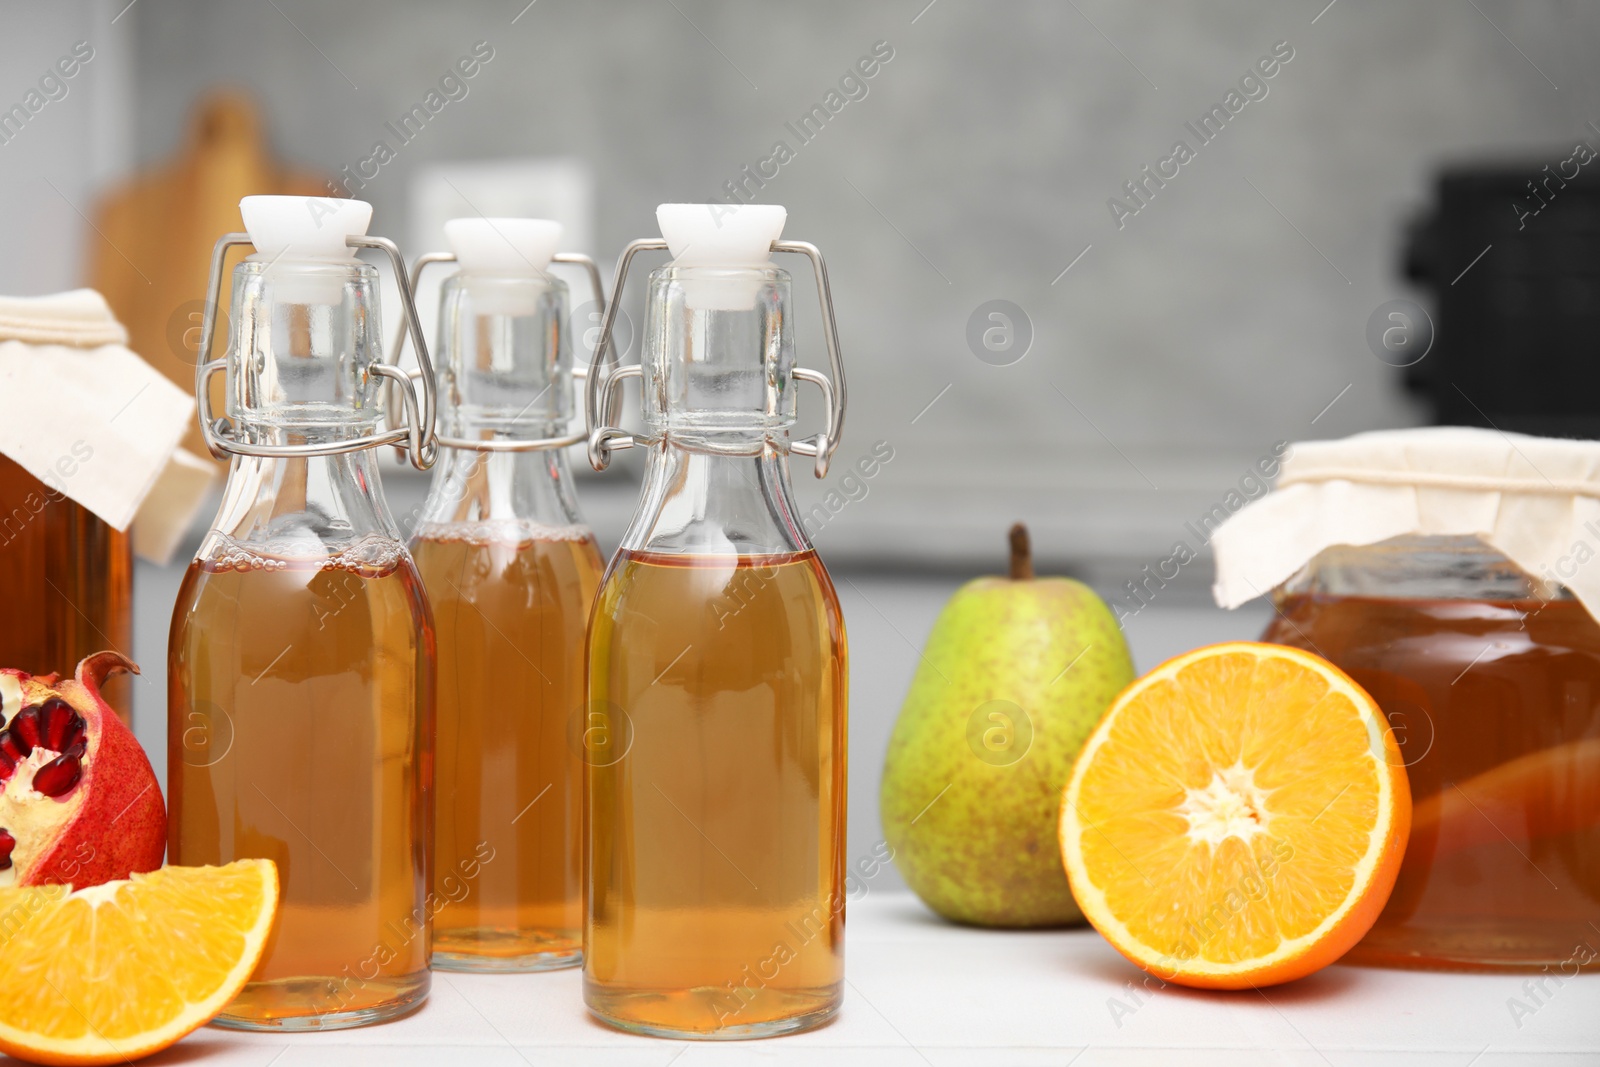 Photo of Homemade fermented kombucha in glass bottles and fresh fruits on white table in kitchen